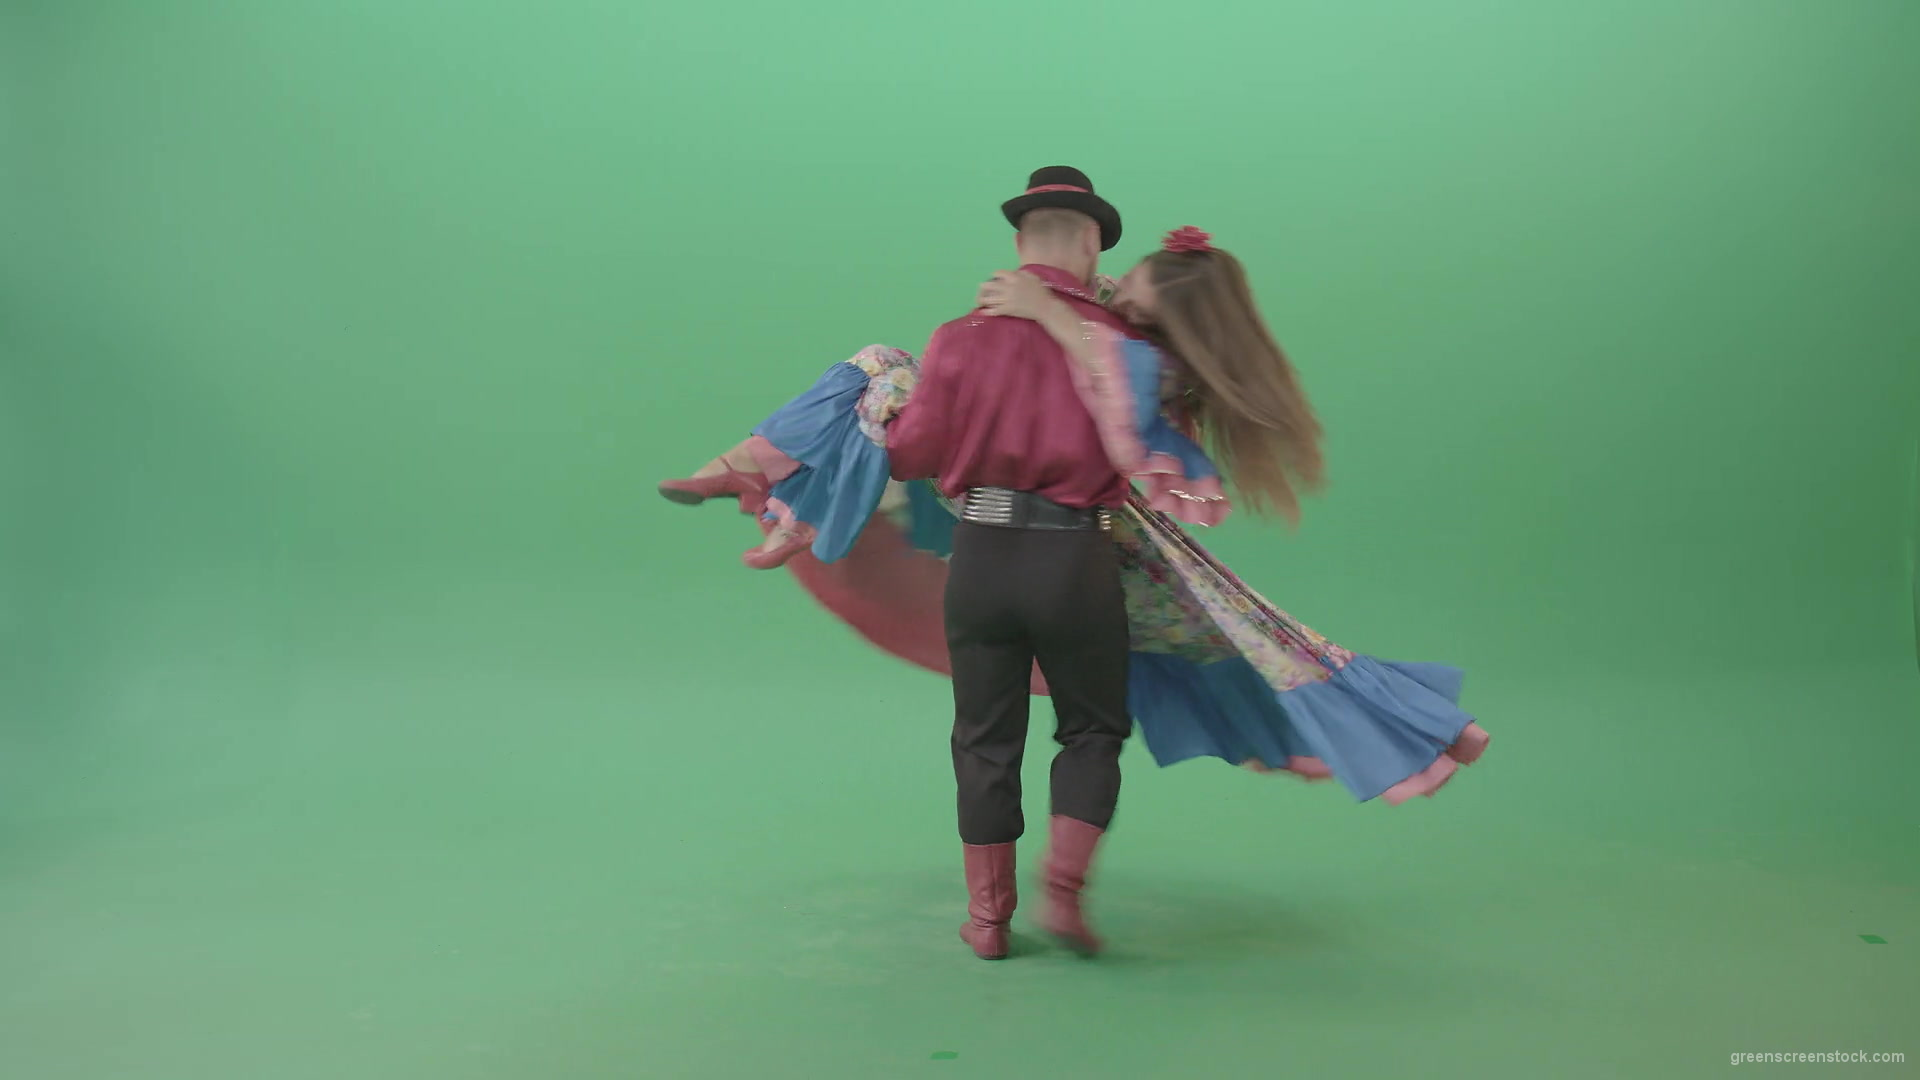 Gypsy-man-and-woman-spinning-dancing-over-green-screen-4K-video-footage-1920_008 Green Screen Stock